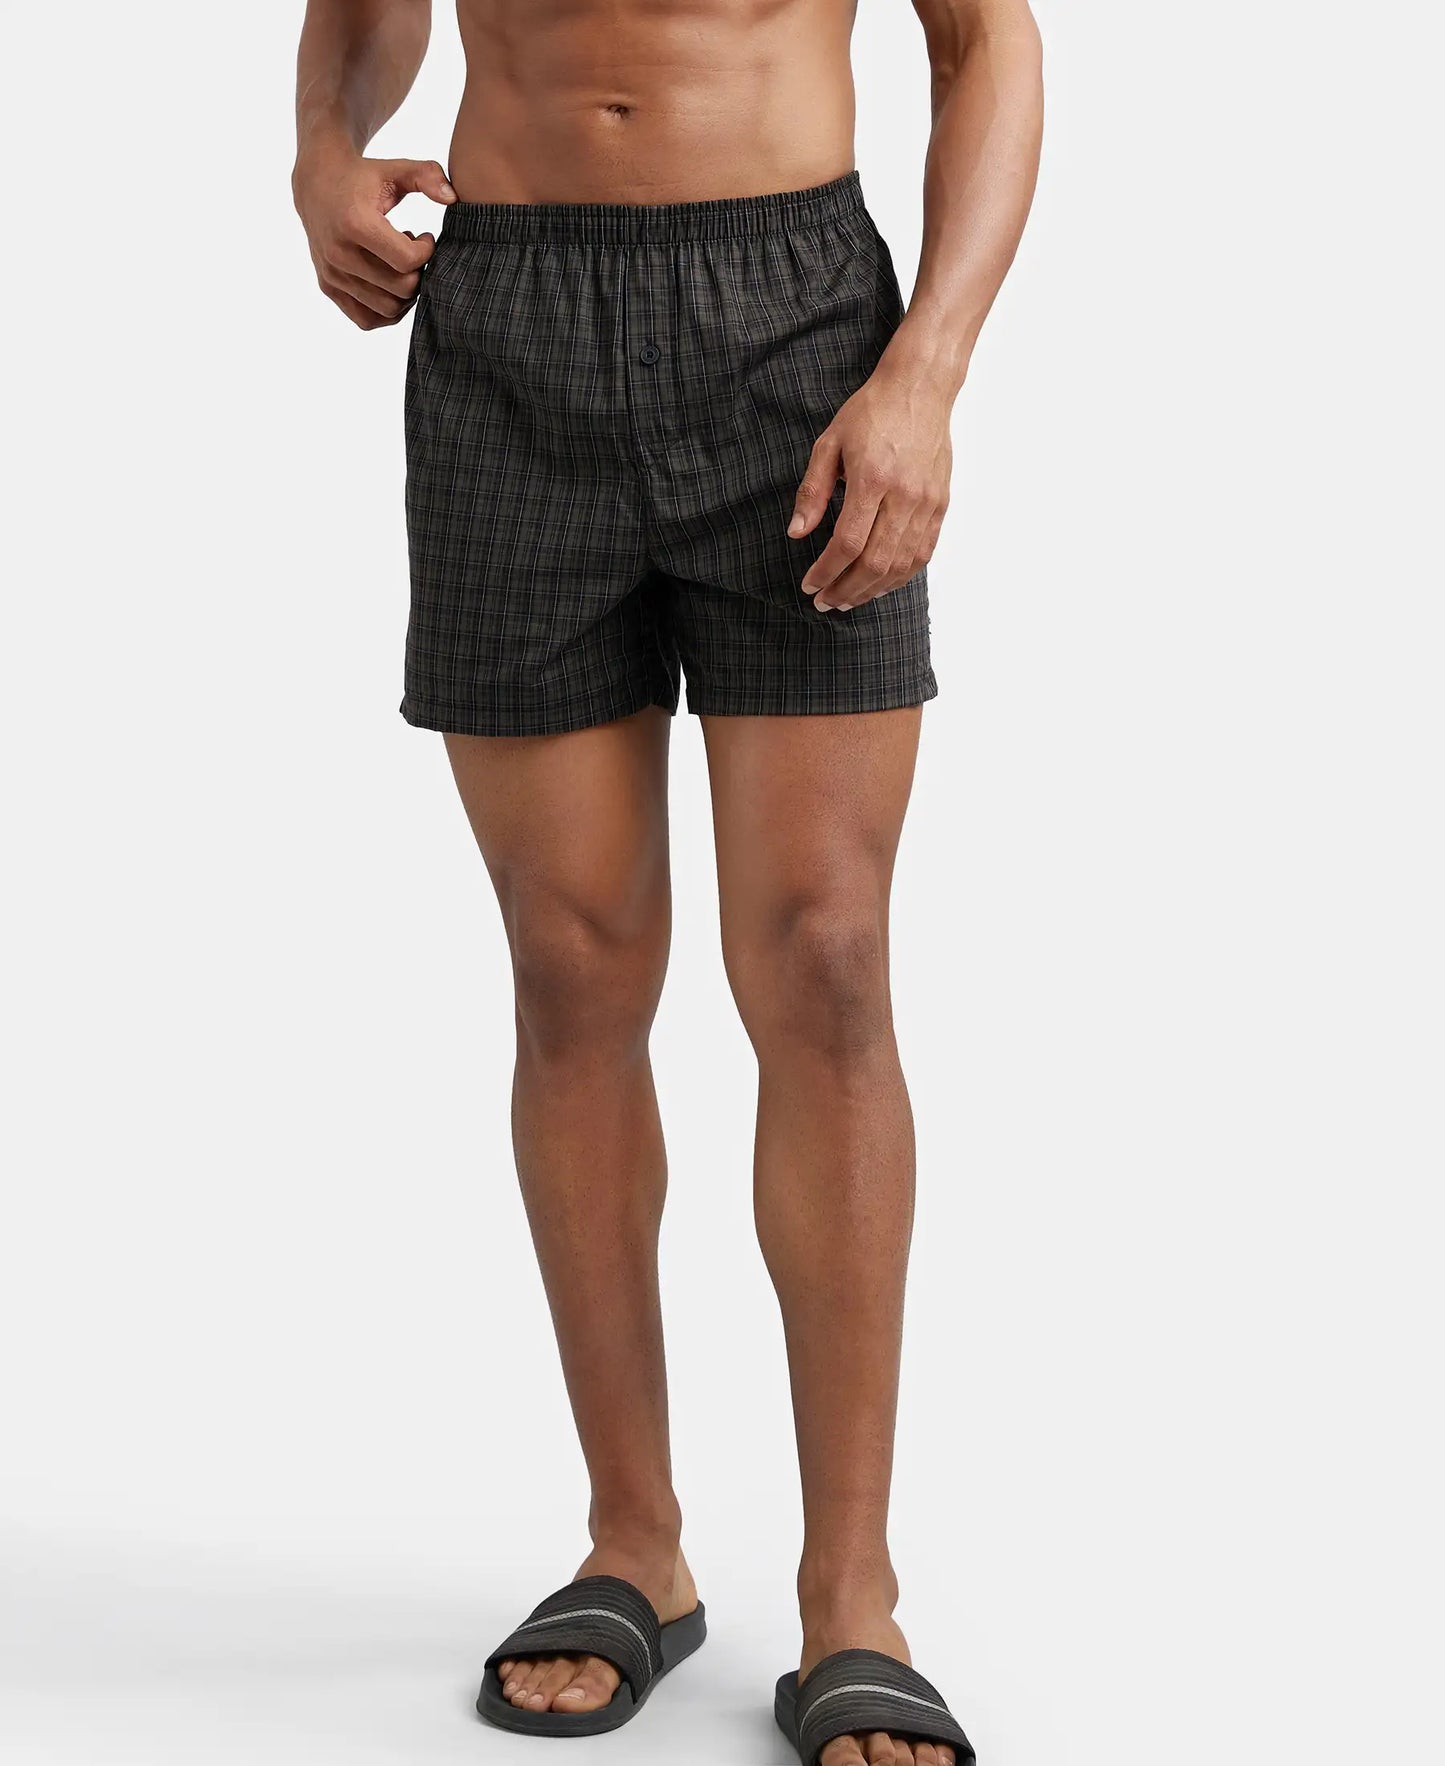 Super Combed Mercerized Cotton Woven Checkered Inner Boxers with Ultrasoft and Durable Inner Waistband - Grey-11